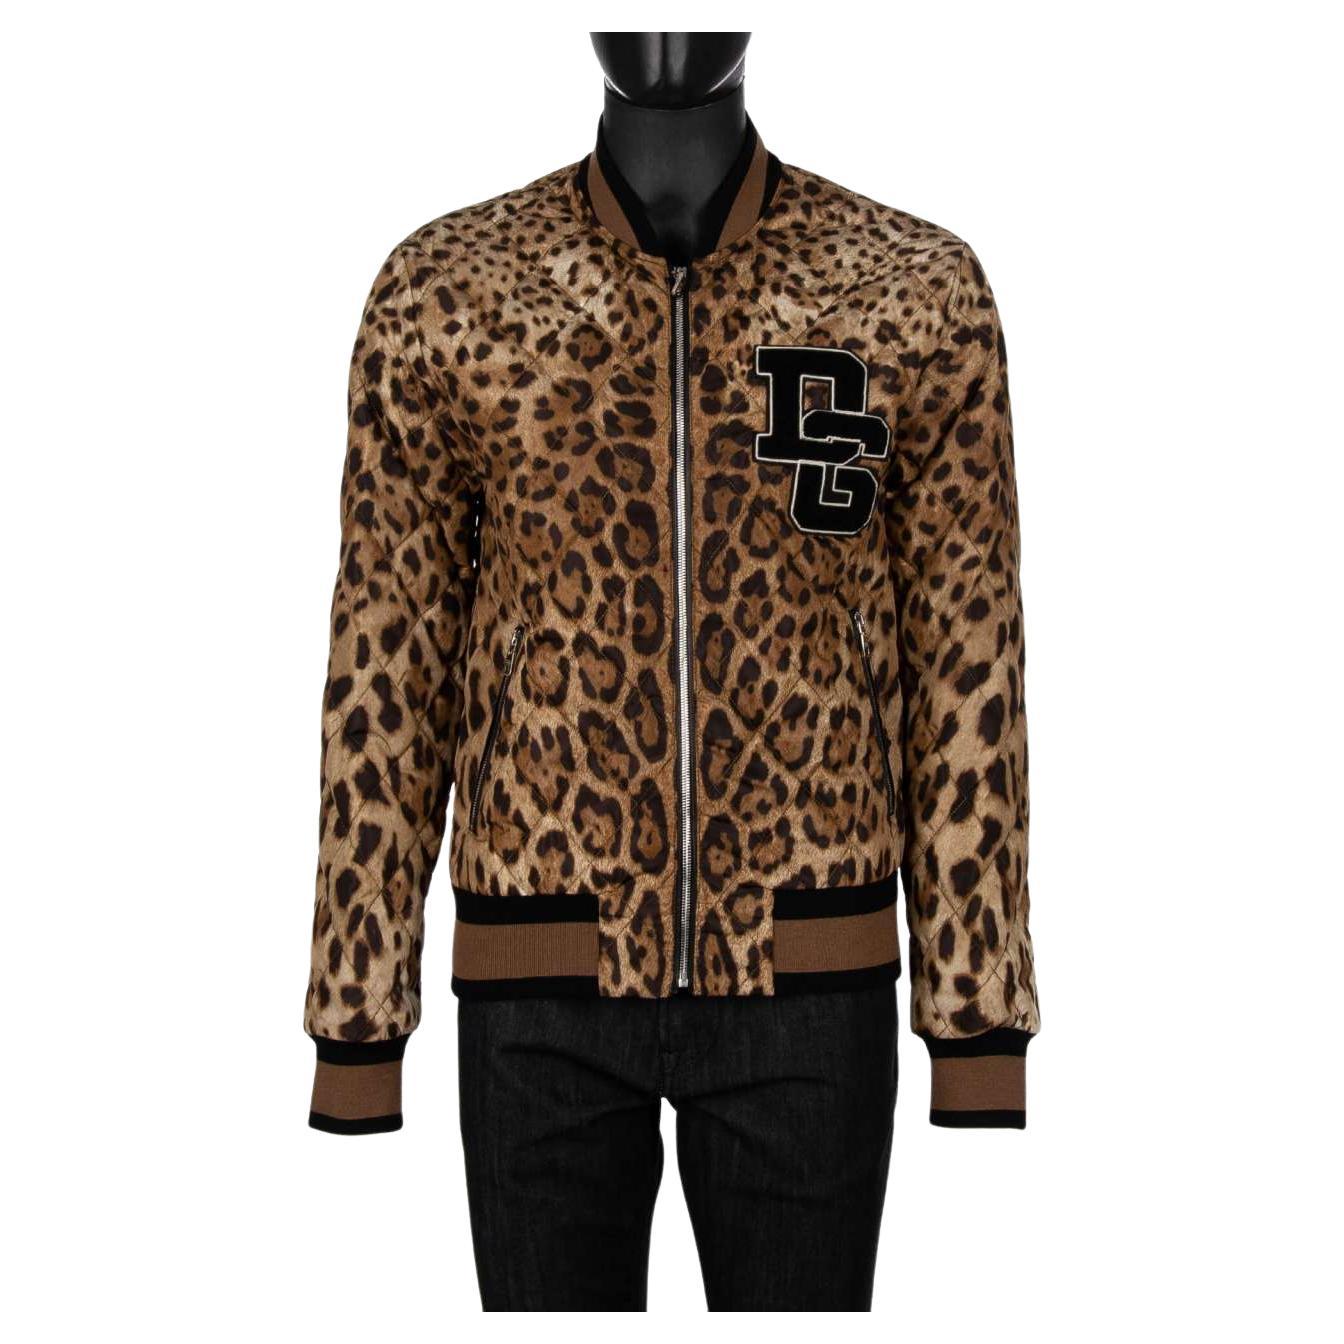 D&G Quilted Leopard Printed Nylon Bomber Jacket with DG Logo Brown Black 50 For Sale